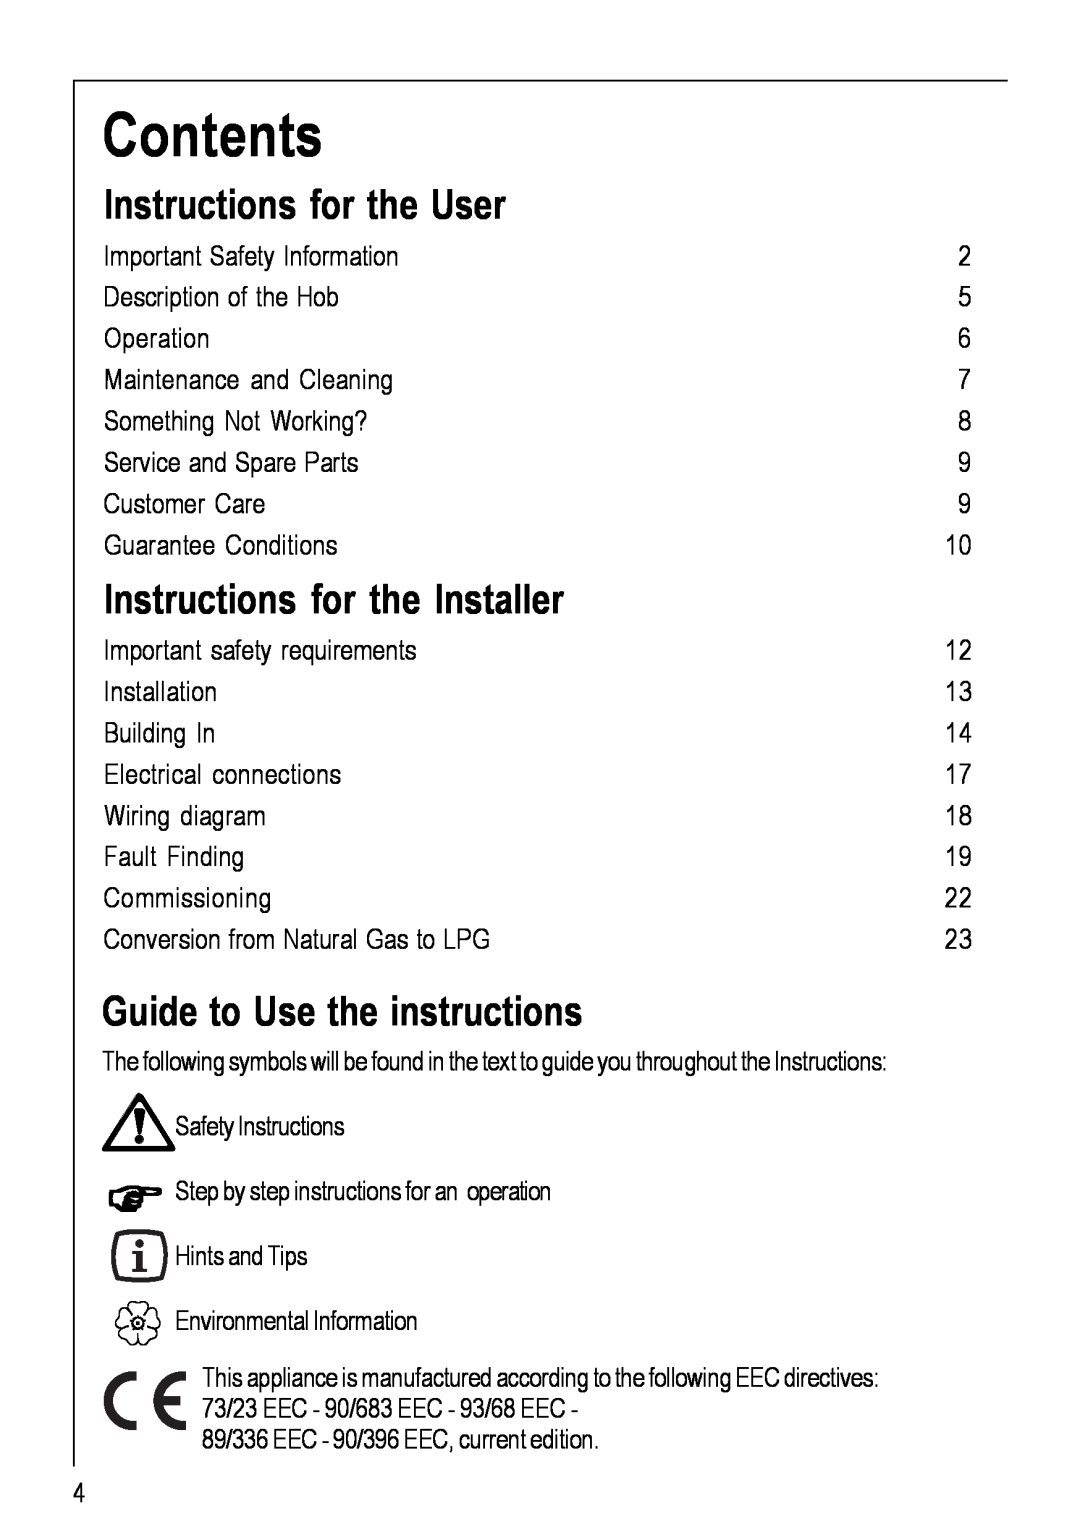 Electrolux 99852 G Contents, Instructions for the User, Instructions for the Installer, Guide to Use the instructions 